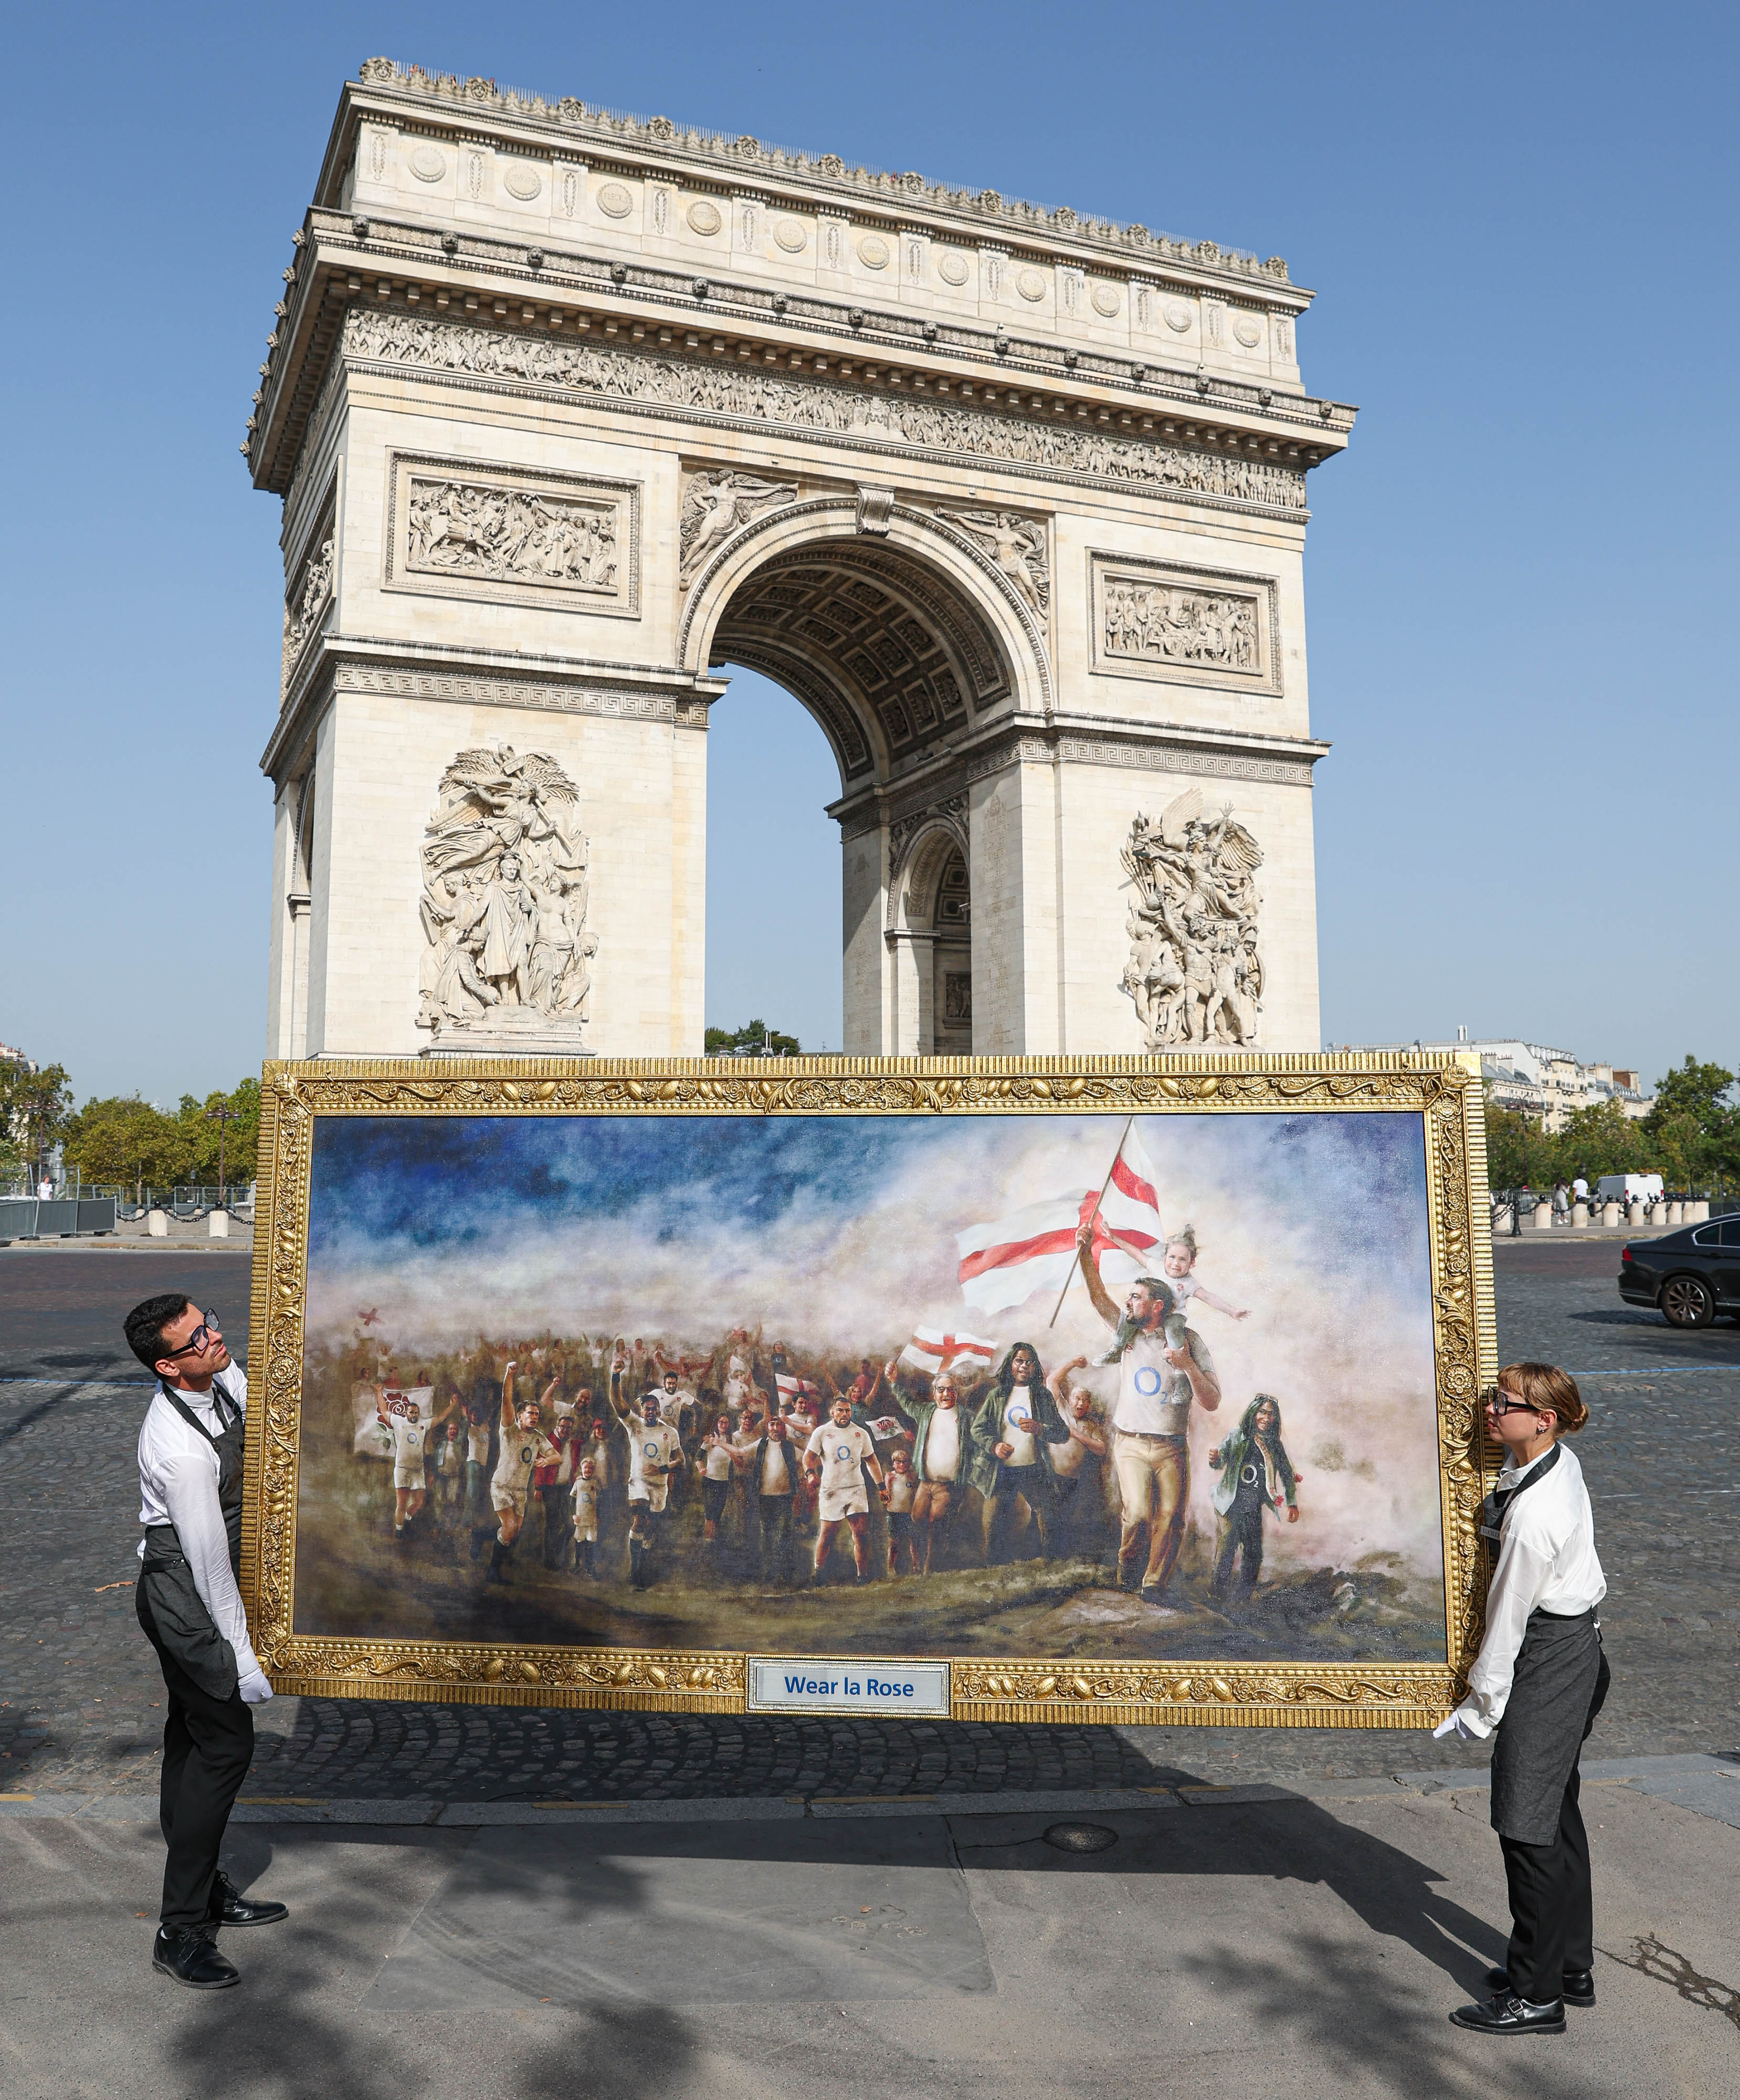 Artwork displayed in front of the Arc de Triomphe in Paris, France